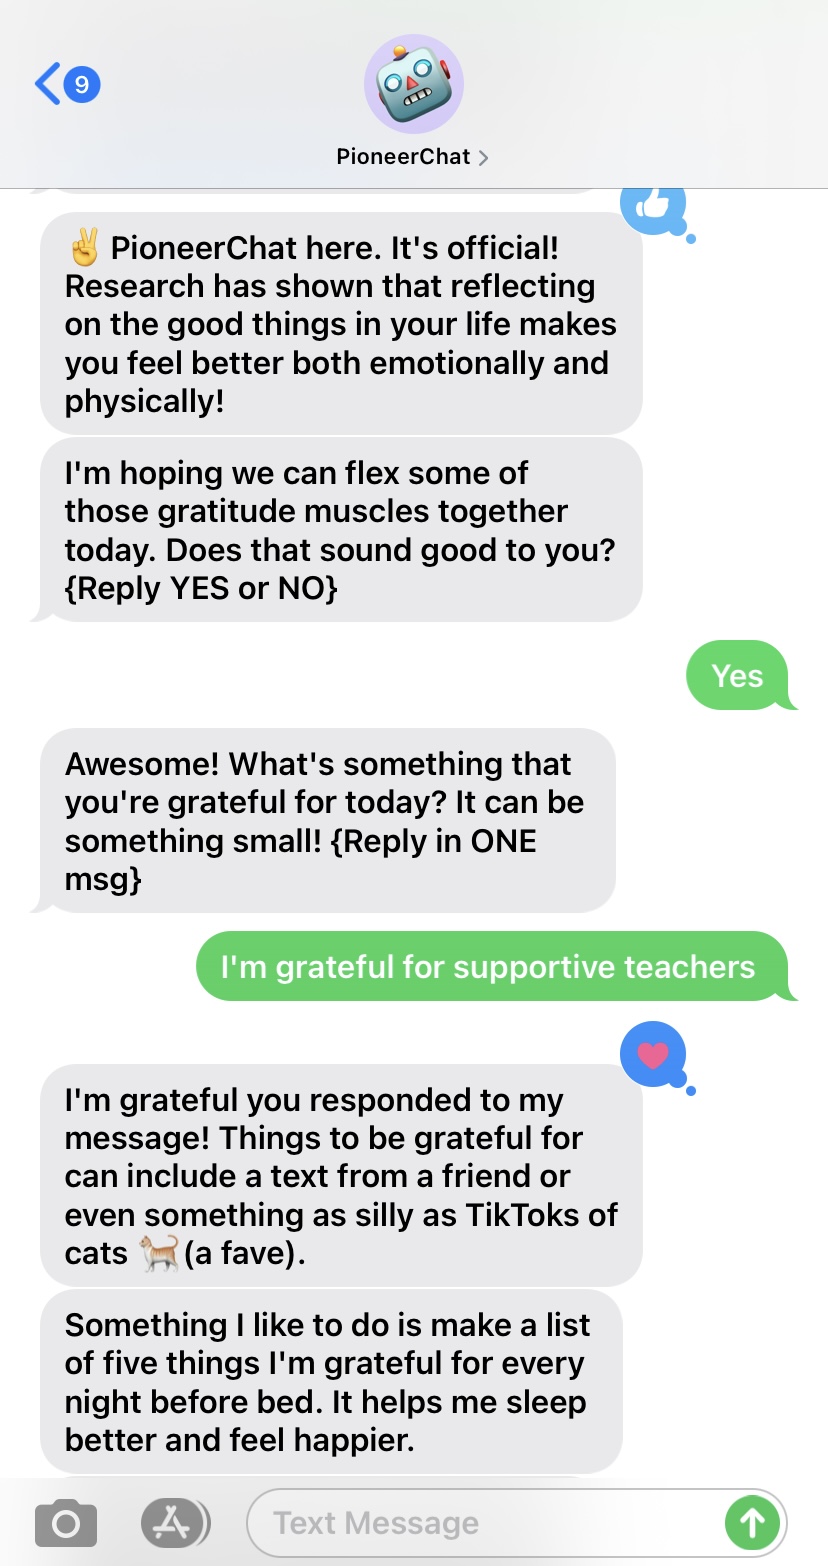 PioneerChat engages student in being grateful